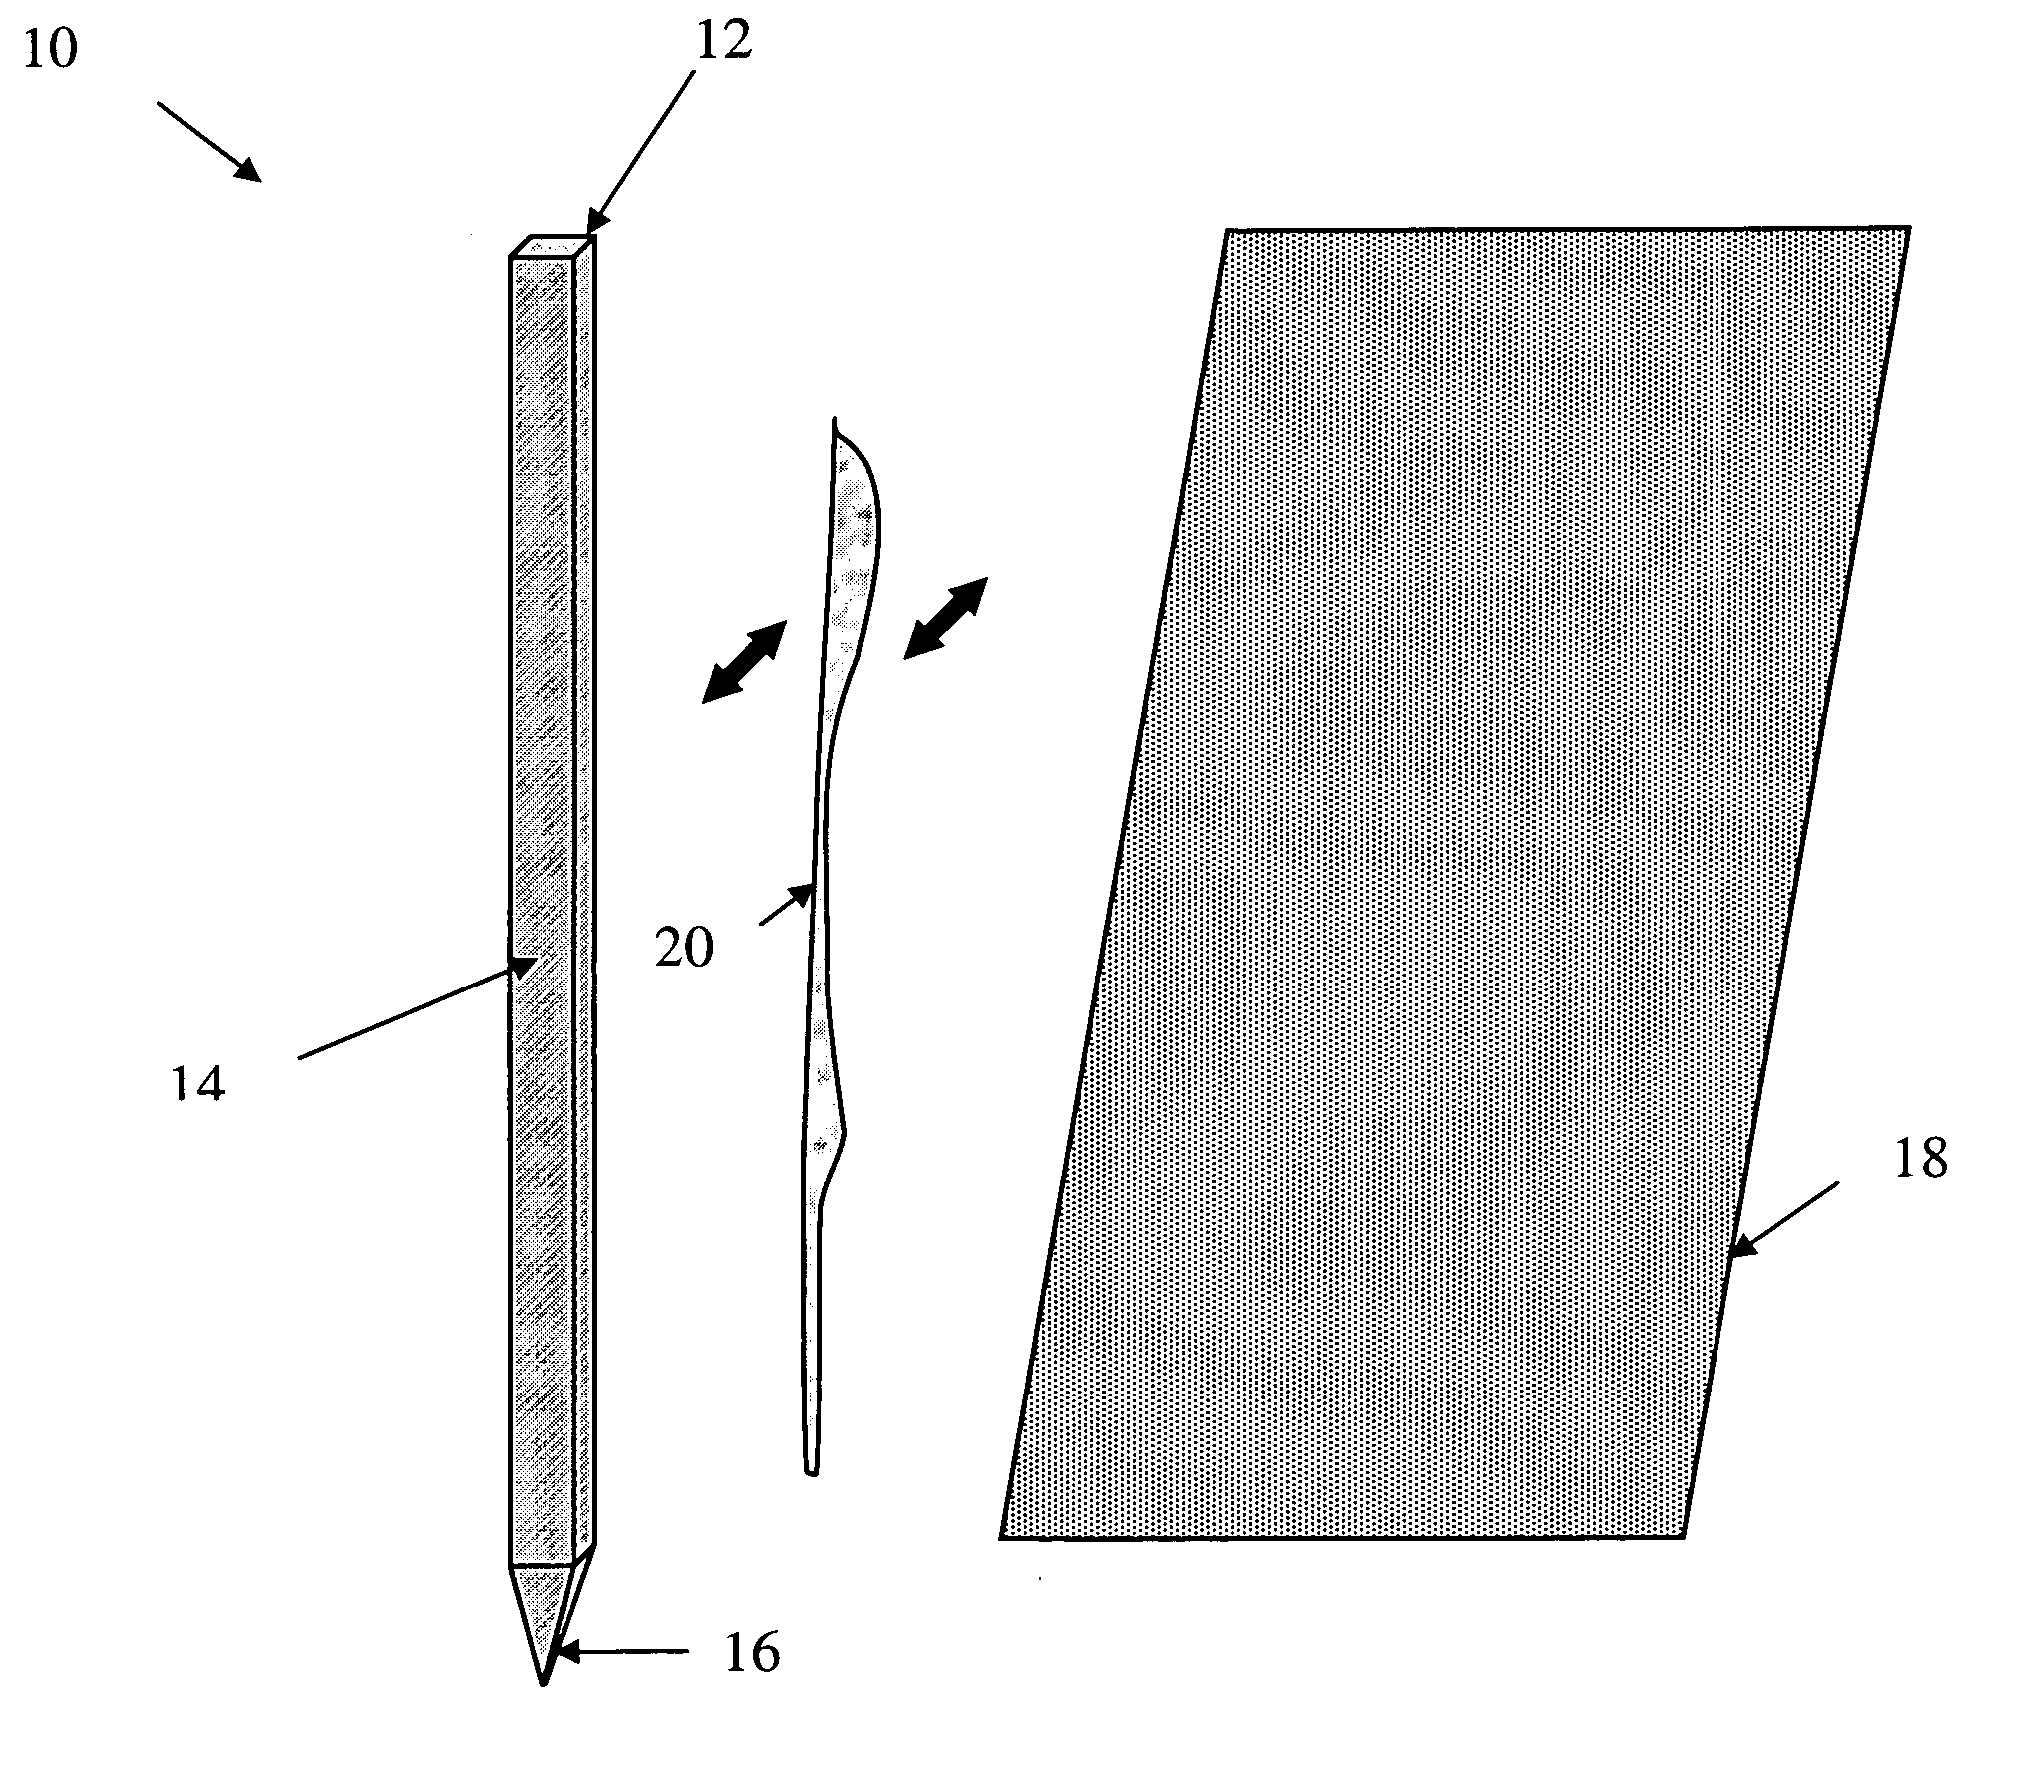 Silt fence apparatus and method of construction